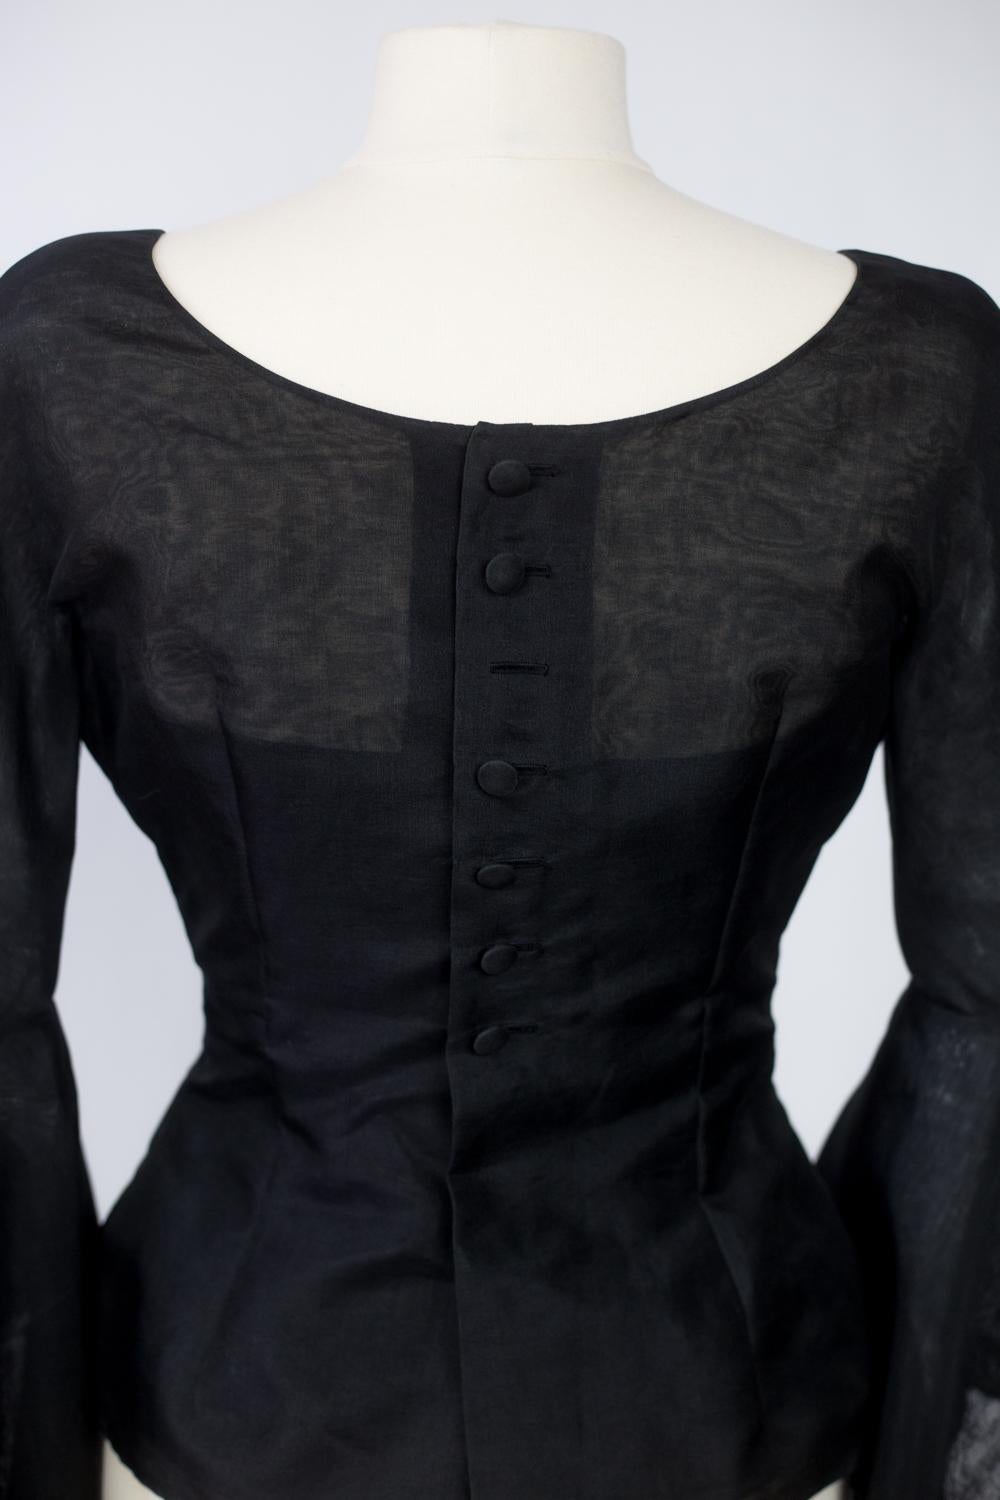 A Pierre Cardin Organza Blouse With Dramatic Batwing Sleeves Circa 1970/1980 For Sale 2